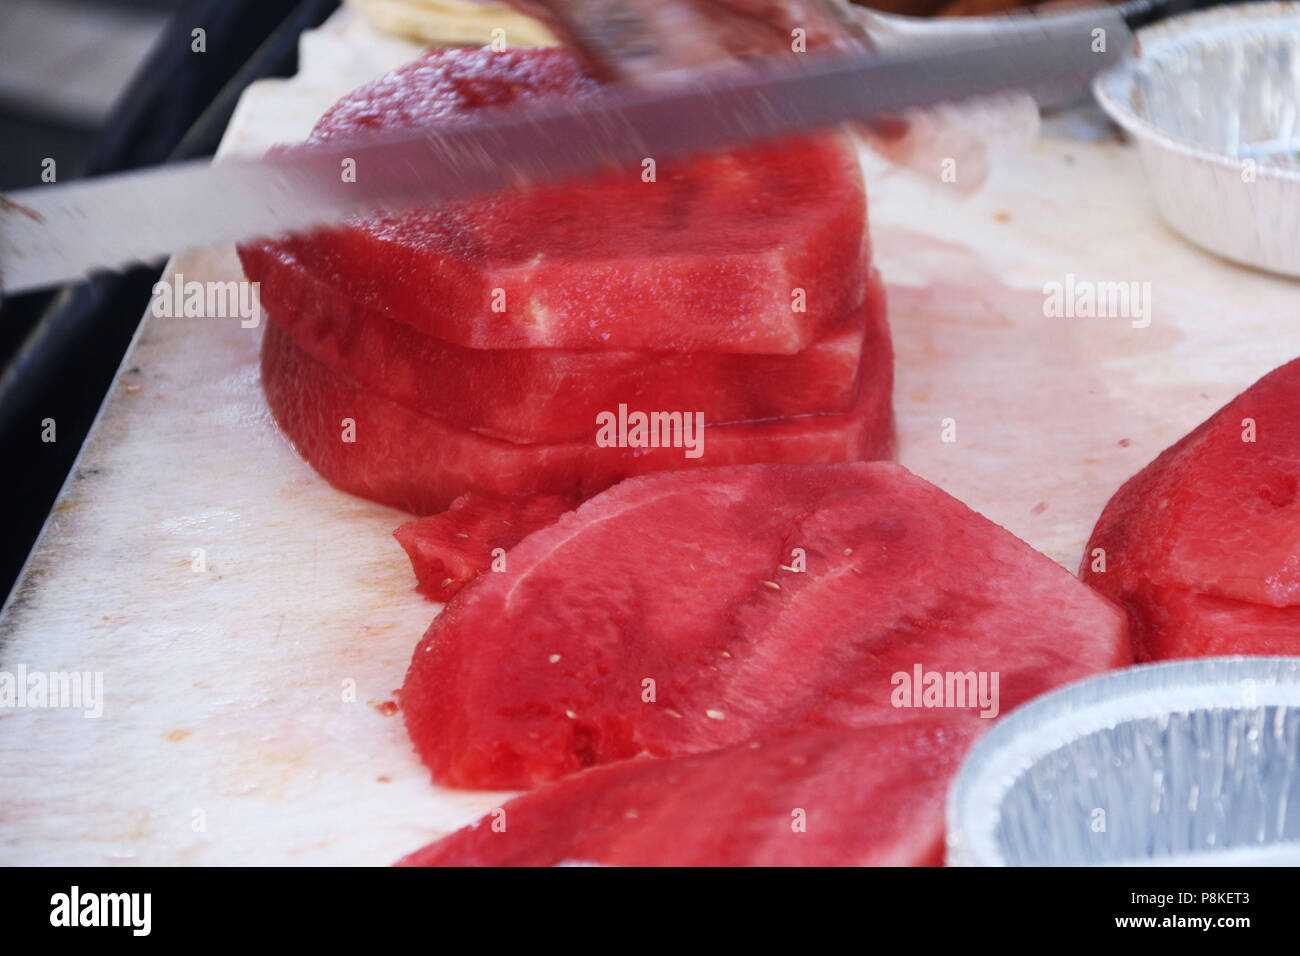 Whole watermelon sliced with a cutting knife Stock Photo